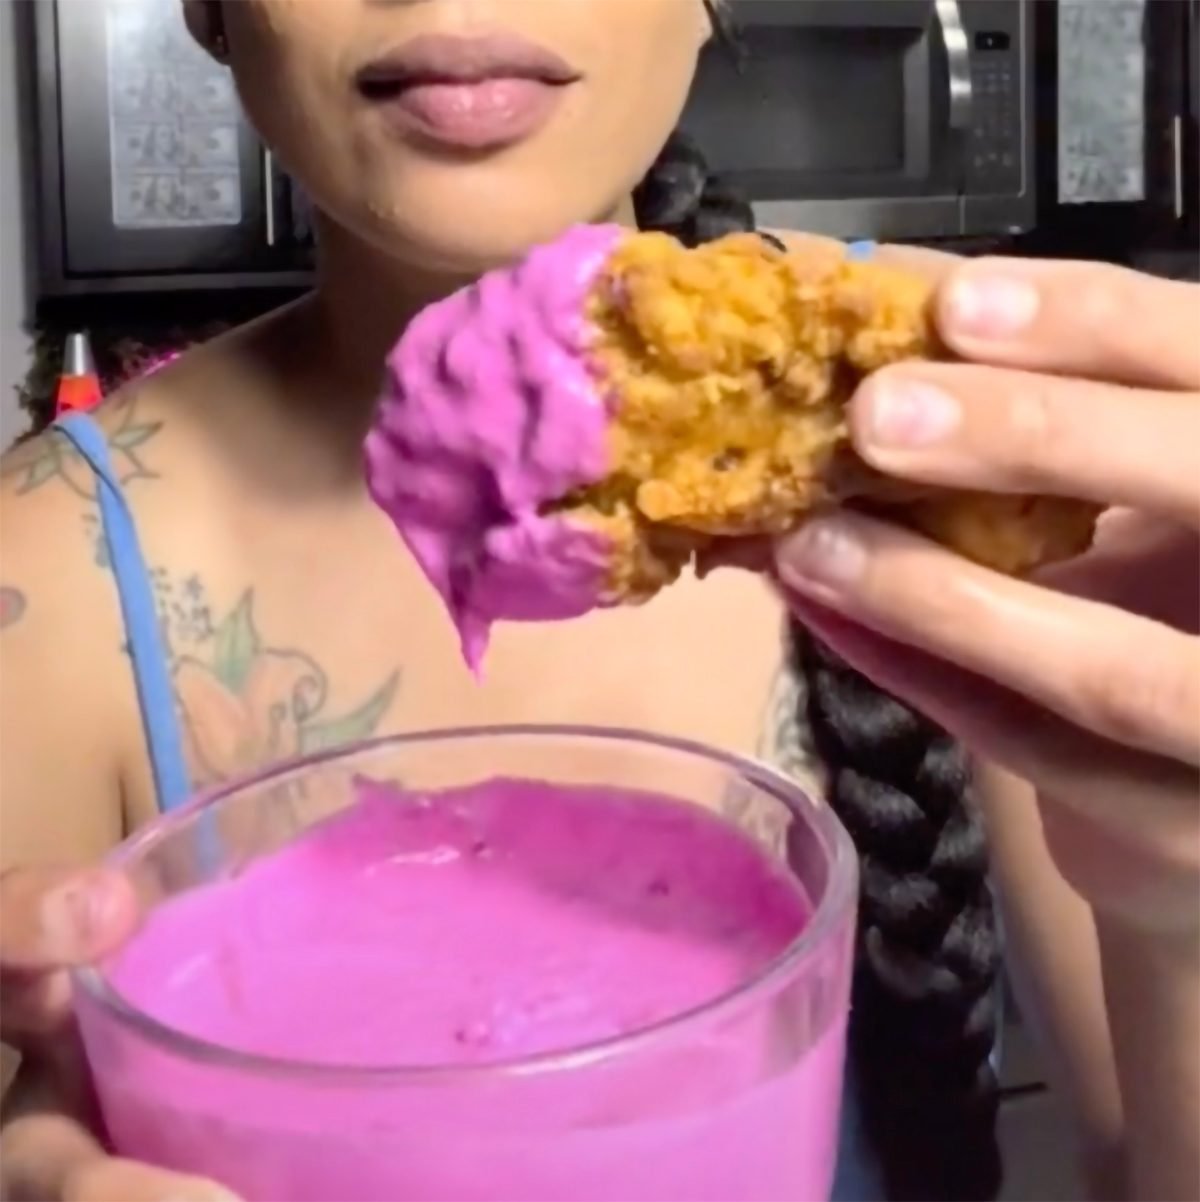 TikTok's Viral Pink Sauce Proves Packaging and Pink Hues Equal